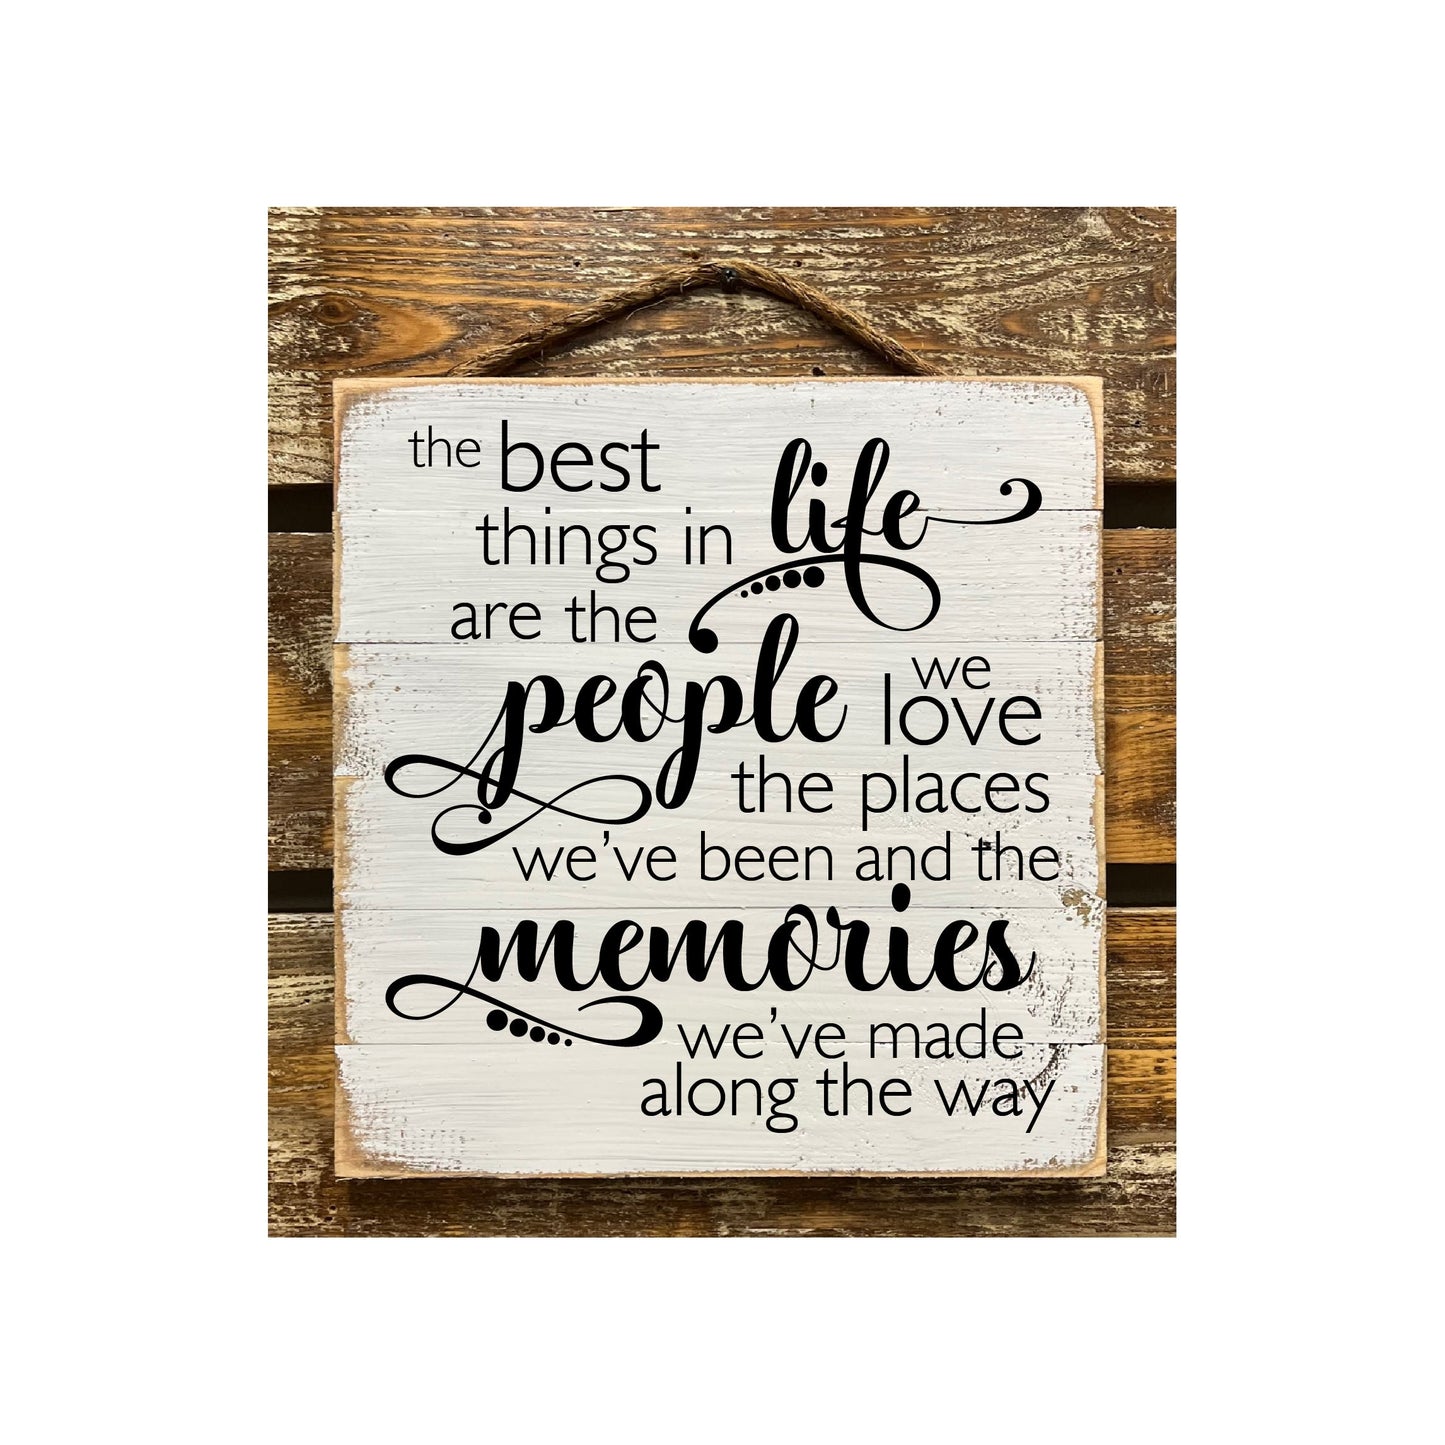 The Best Things In Life Are The People We Love...